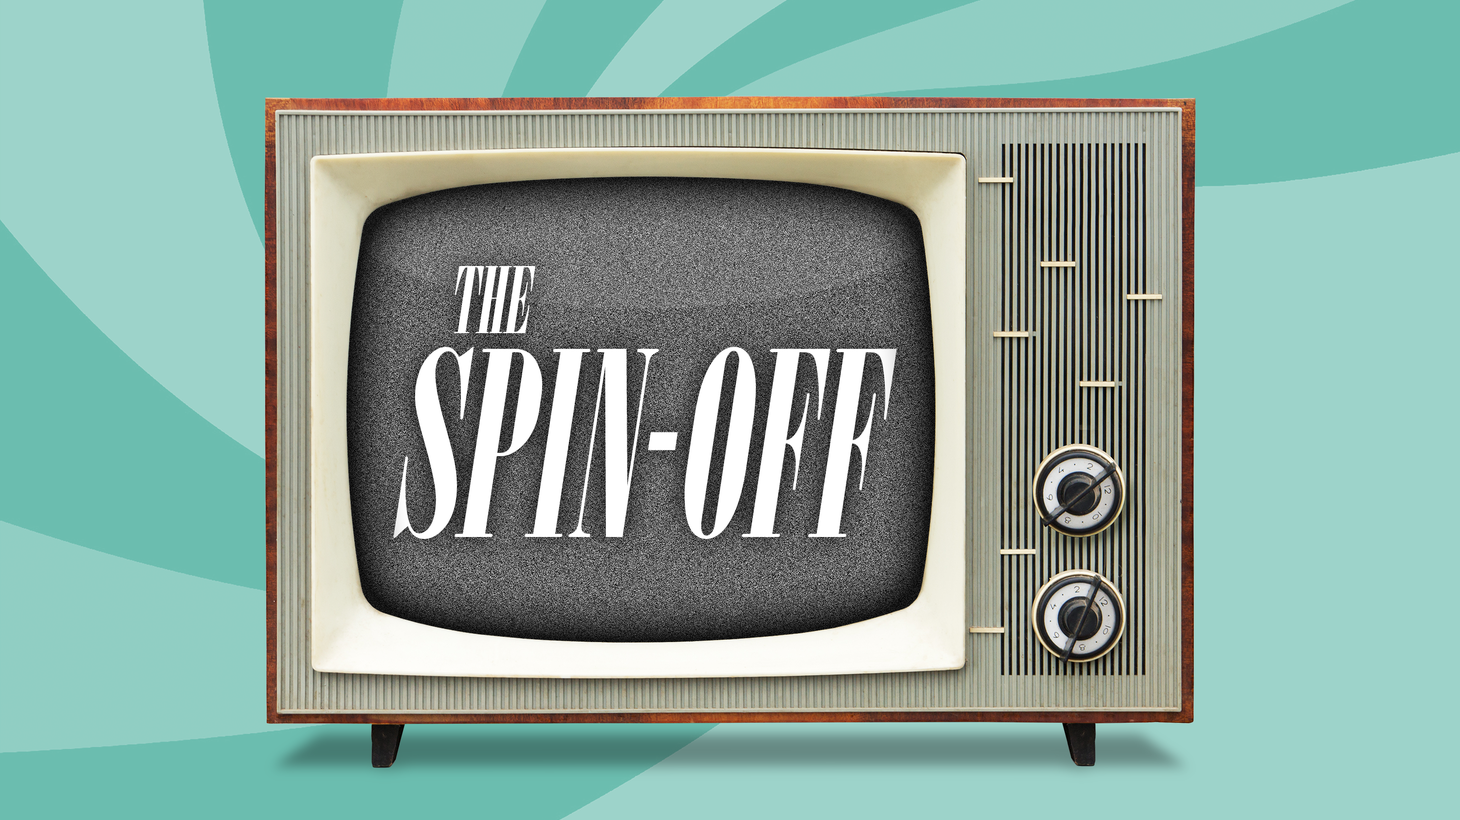 In this special edition of the Spin-Off, we bring you a conversation between Michael Schneider and Fox chiefs Dana Walden and Gary Newman, recorded as a part of Paley Dialogues LA, hosted by the Paley Media Council.